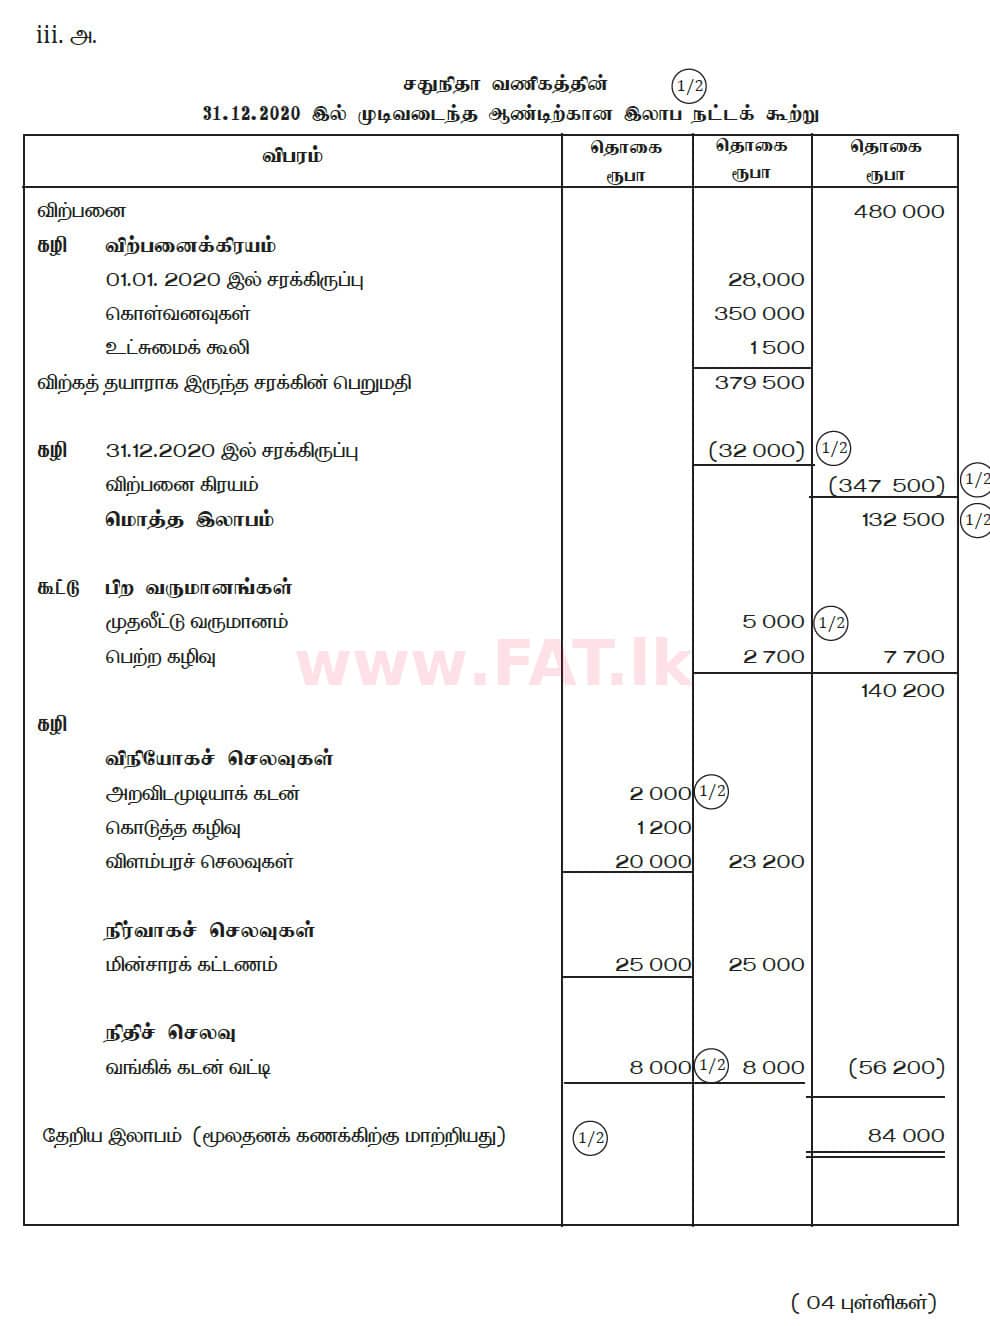 National Syllabus : Ordinary Level (O/L) Business and Accounting Studies - 2020 March - Paper II (தமிழ் Medium) 7 5789